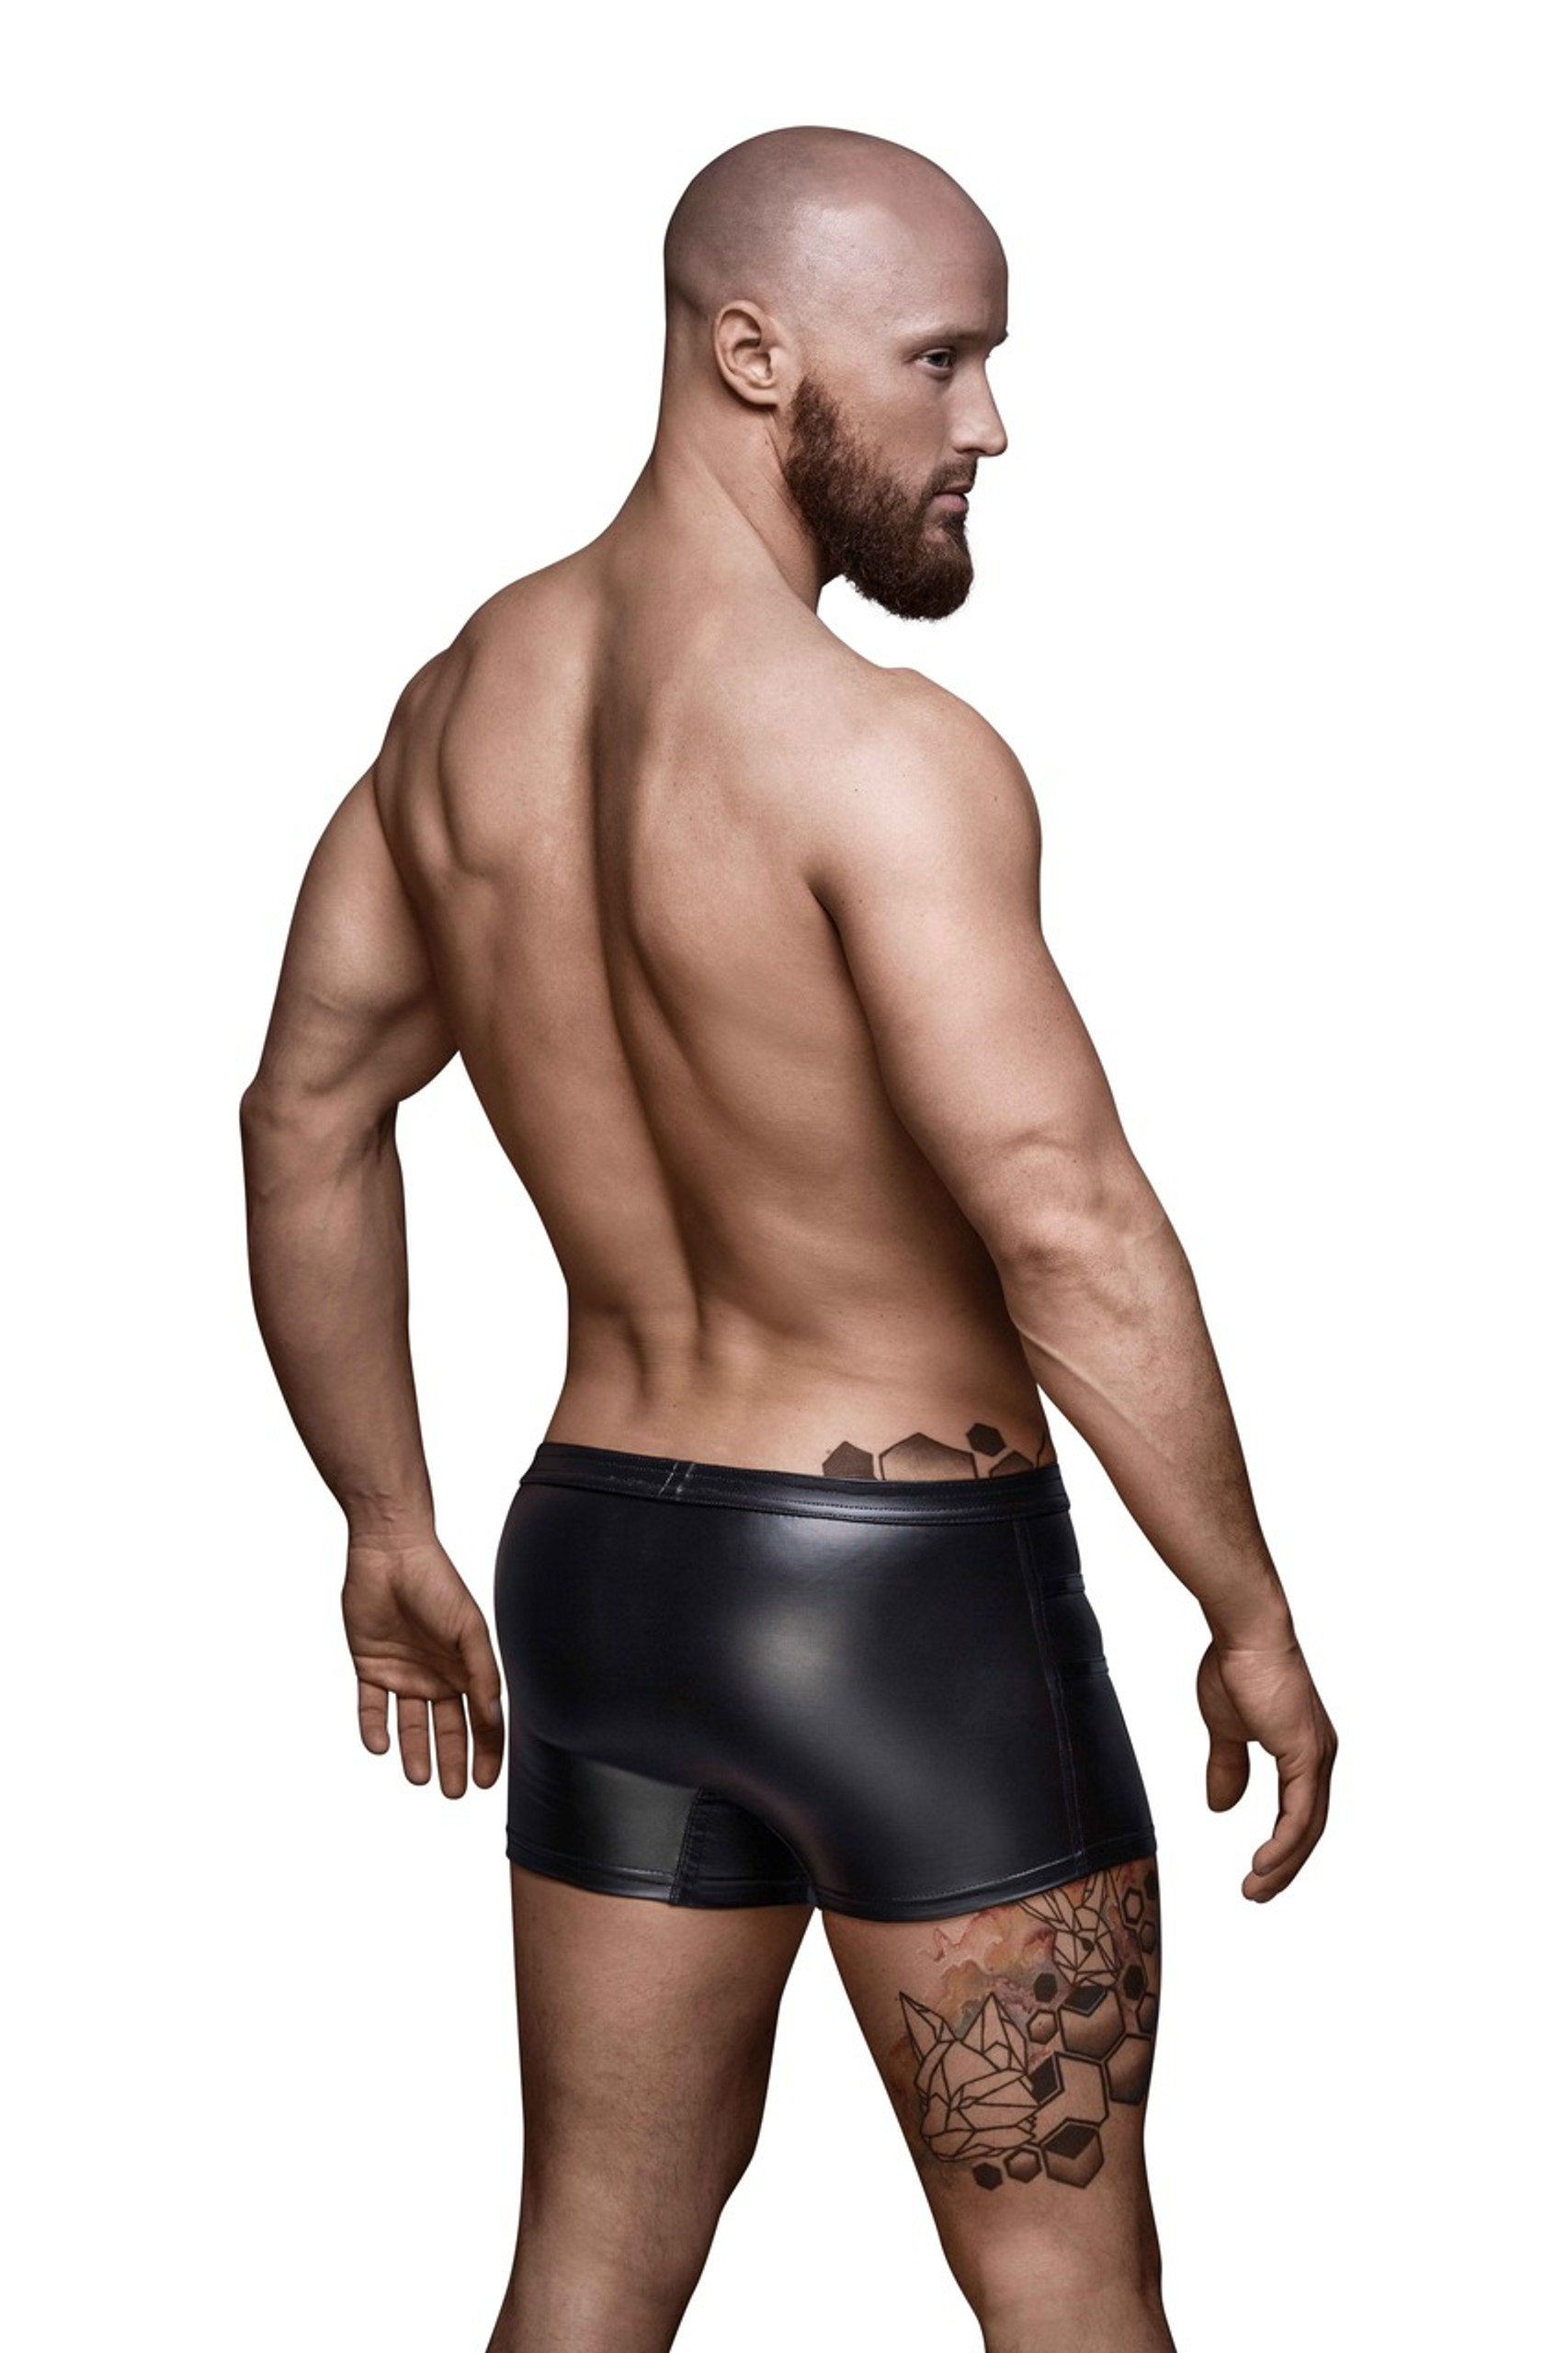 Noir Handmade H006 Sexy shorts with hot details